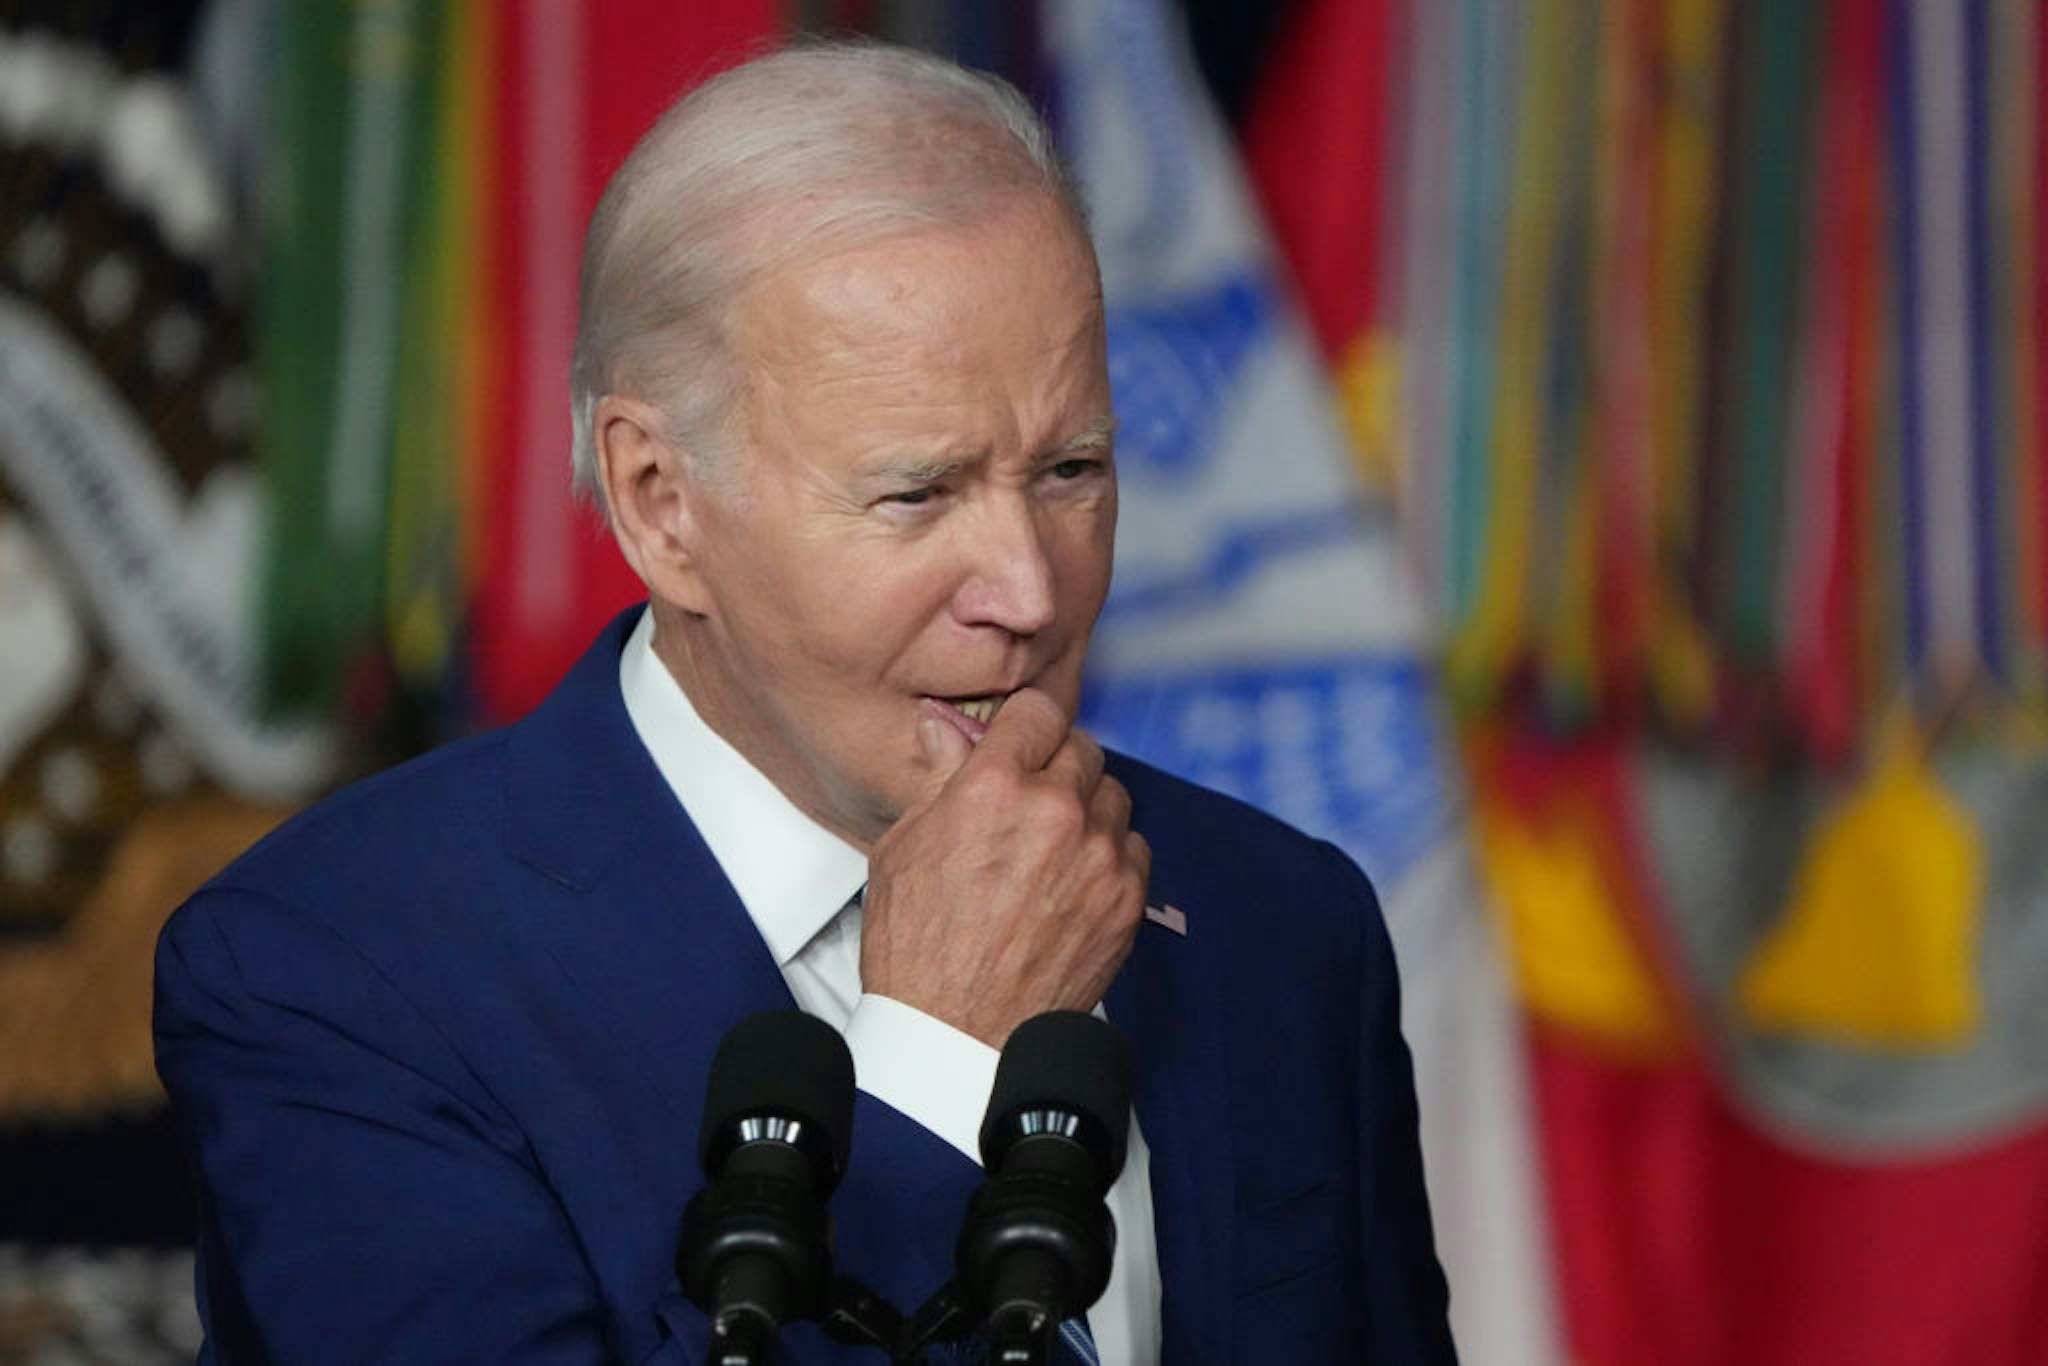 SALT LAKE CITY, UTAH - AUGUST 10: U.S. President Joe Biden speaks at the George E. Wahlen Department of Veterans Affairs Medical Center on August 10, 2023 in Salt Lake City, Utah. President Biden was celebrating the first anniversary of the PACT Act. (Photo by George Frey/Getty Images)